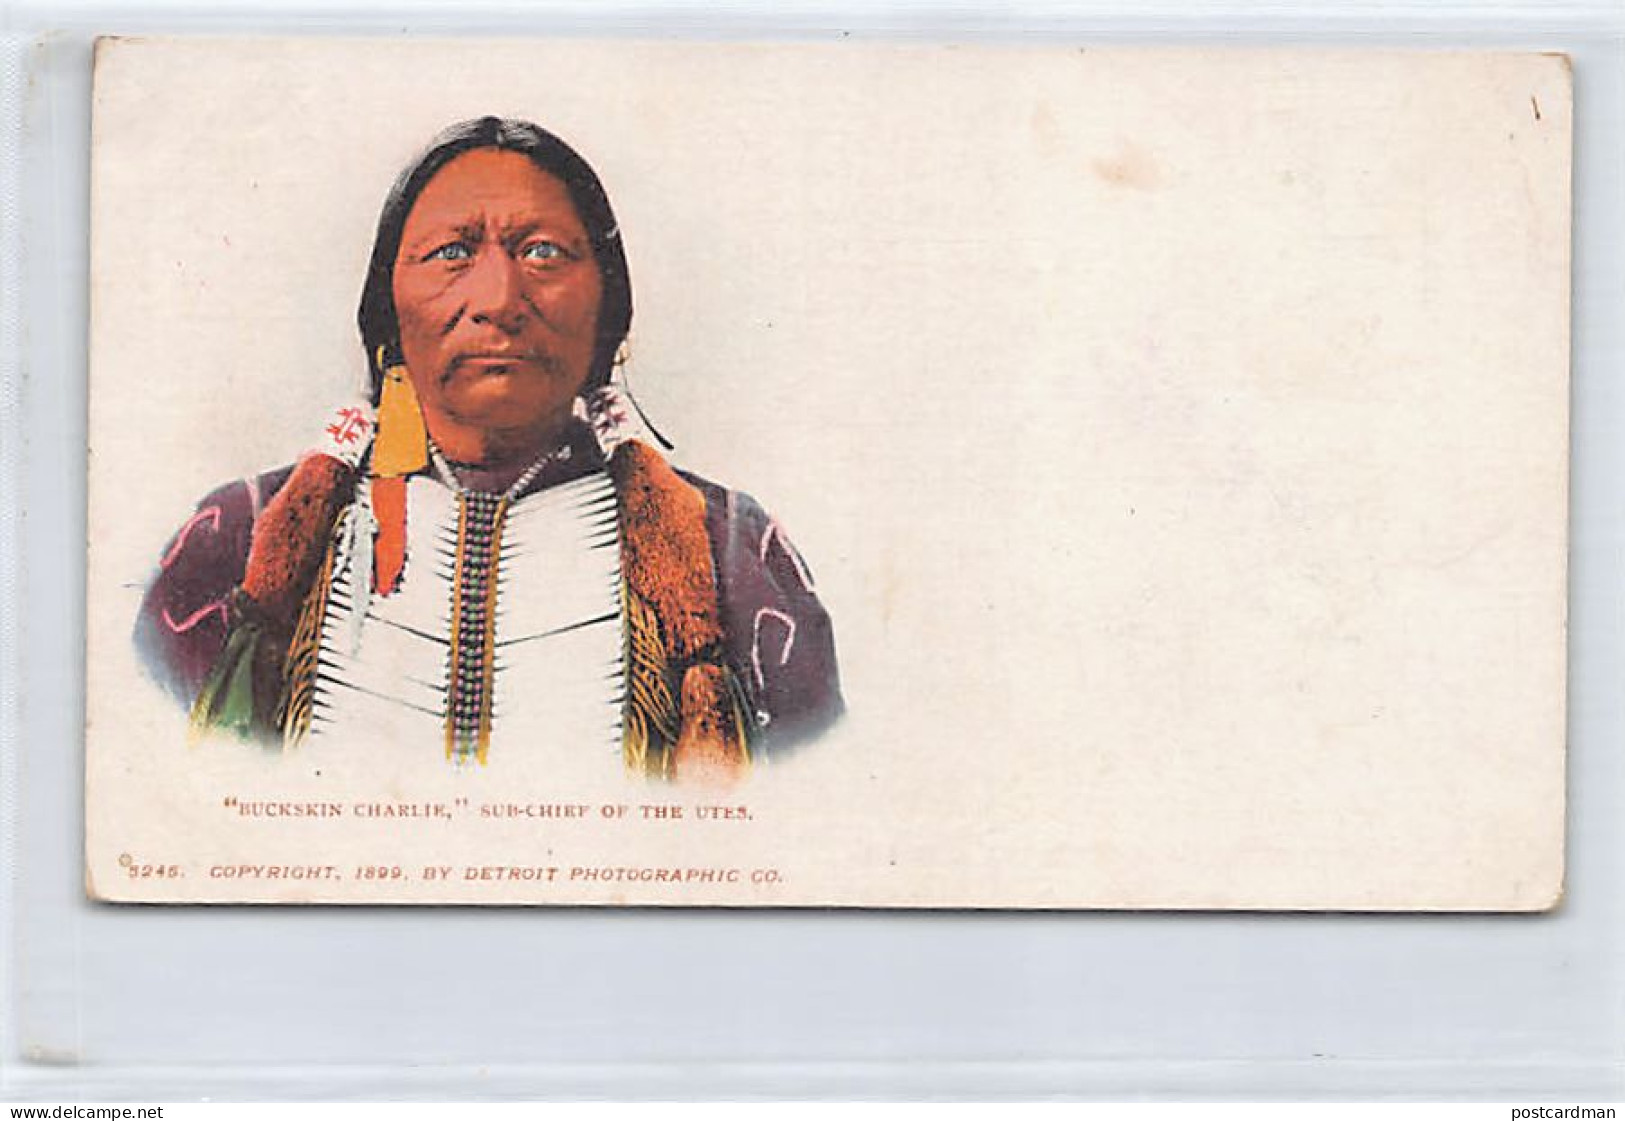 Usa - Native Americana - Buckskin Charlie, Sub-chief Of The Utes - Publ. Detroit Photographic Co. 5245 - Indianer